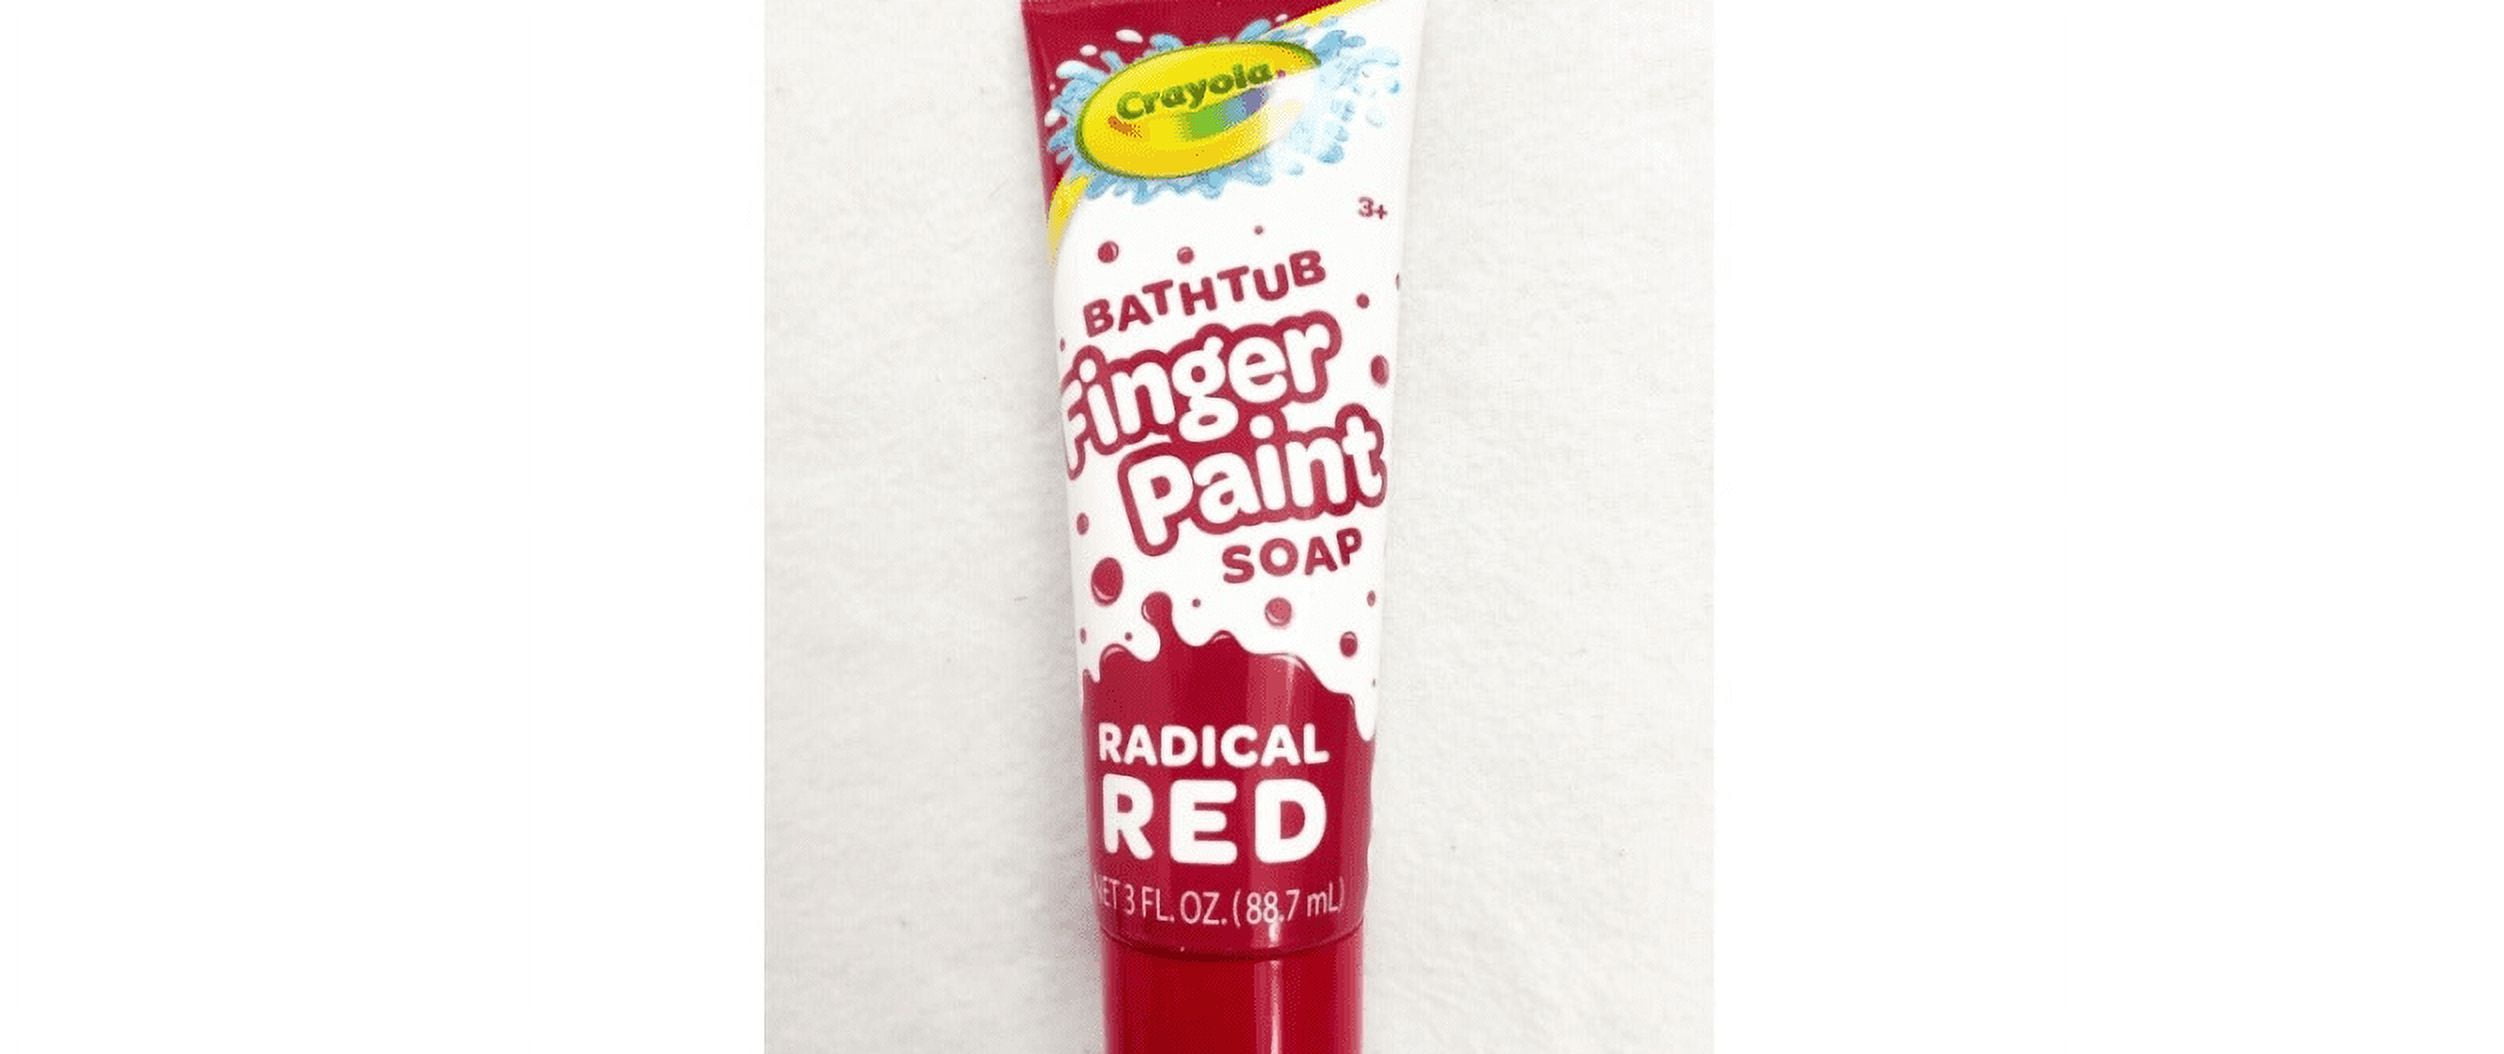 Bathtub finger paint soap by crayola 👍🏻👍🏻👏🏻👏🏻, painting